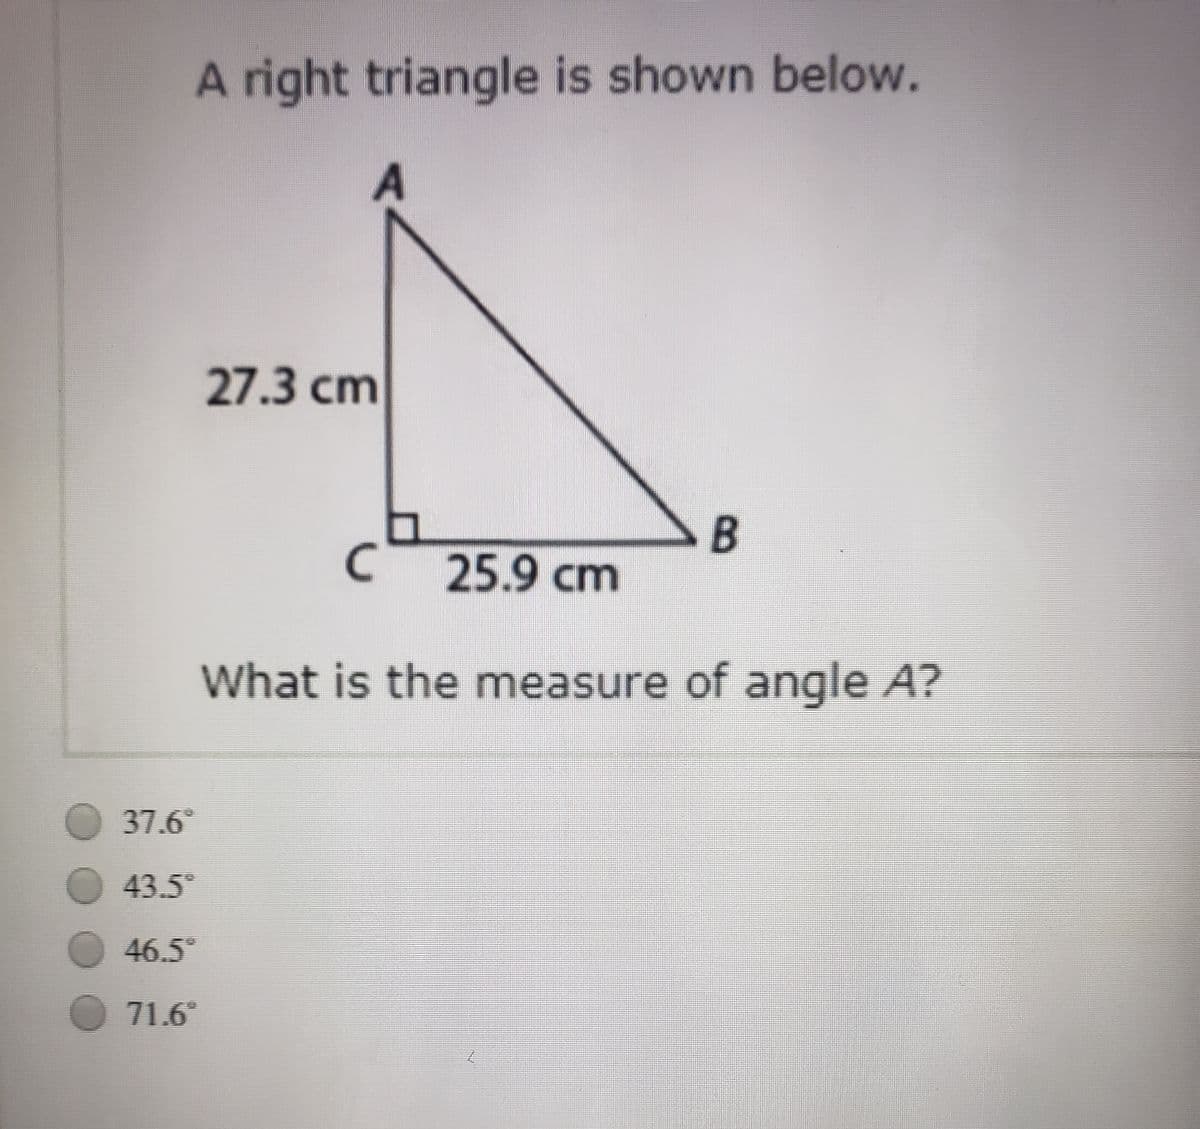 A right triangle is shown below.
27.3 cm
B
25.9 cm
What is the measure of angle A?
O 37.6°
43.5°
46.5
71.6
